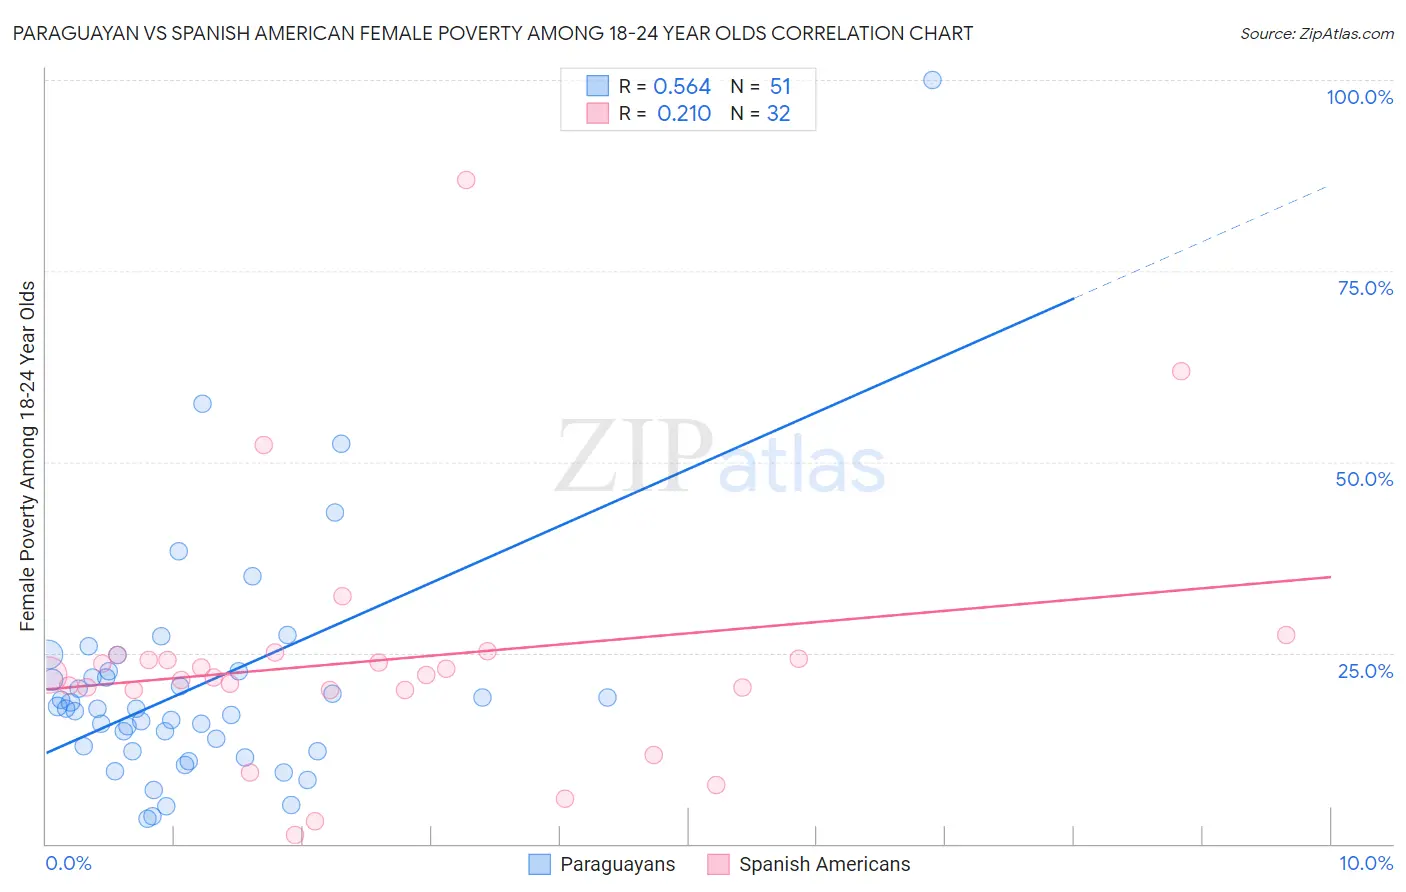 Paraguayan vs Spanish American Female Poverty Among 18-24 Year Olds